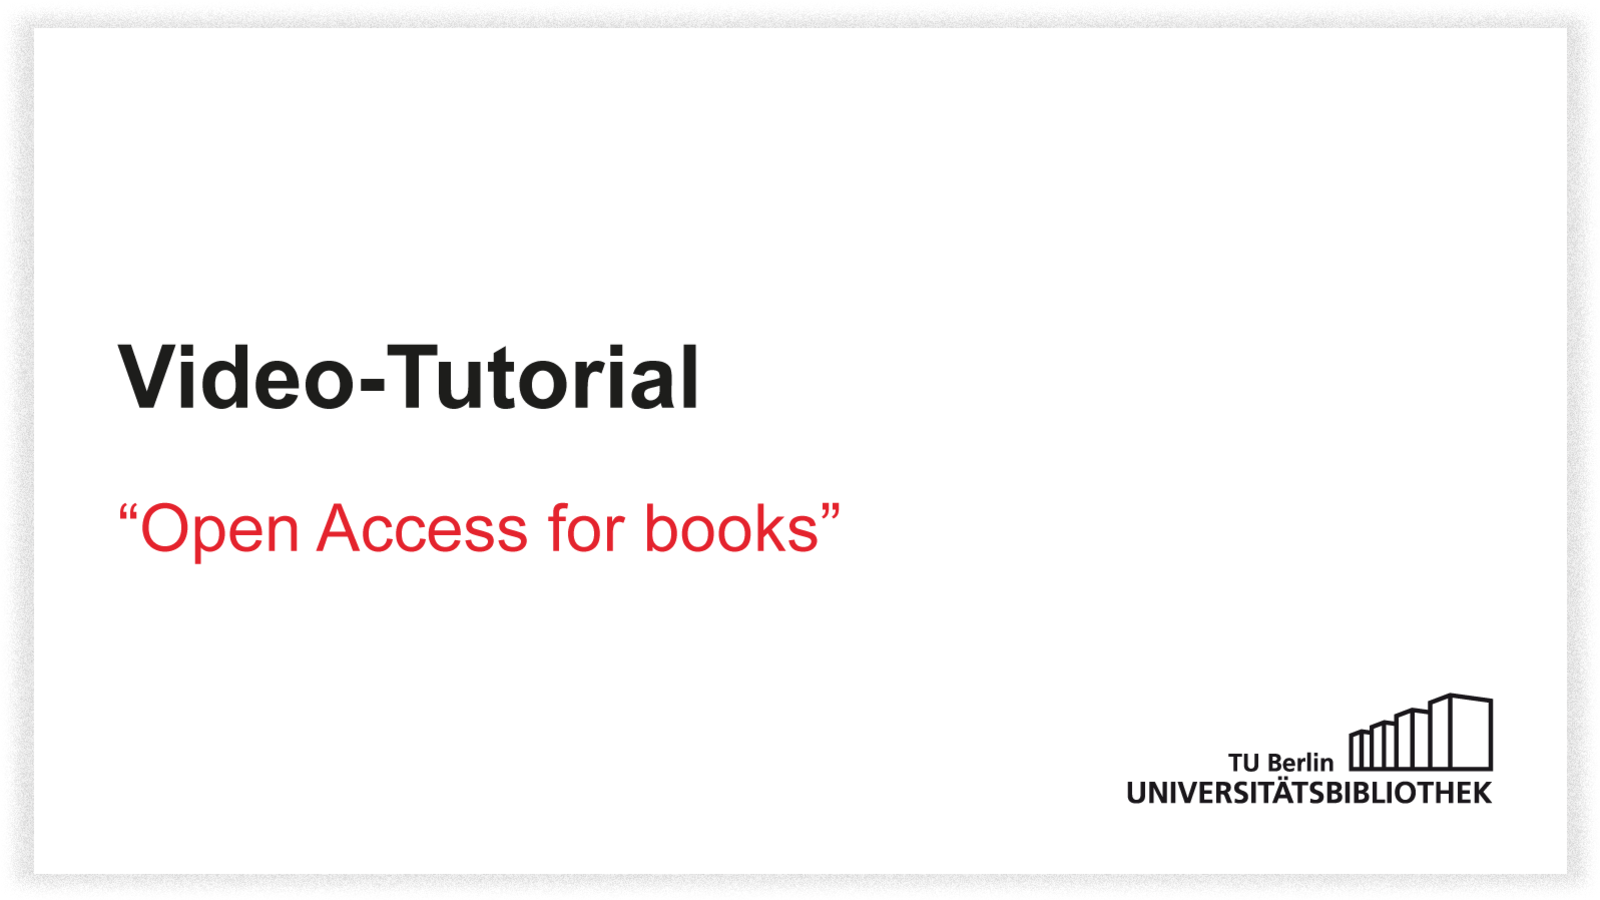 Video-Tutorial: Open Access for books, englisch only